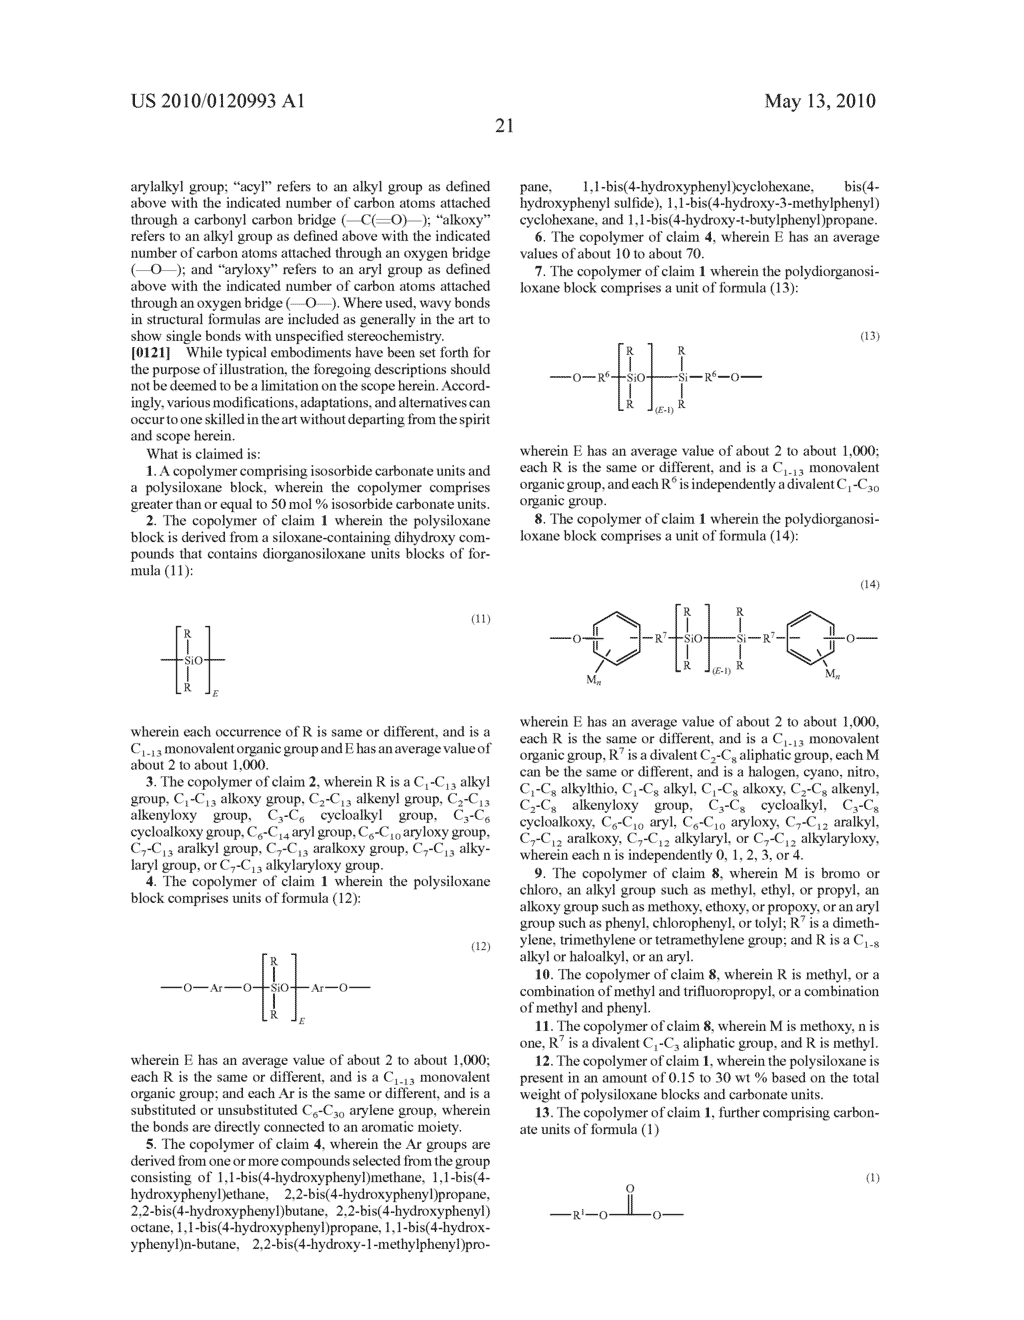 ALIPHATIC DIOL-BASED POLYCARBONATES, METHOD OF MAKING, AND ARTICLES FORMED THEREFROM - diagram, schematic, and image 23